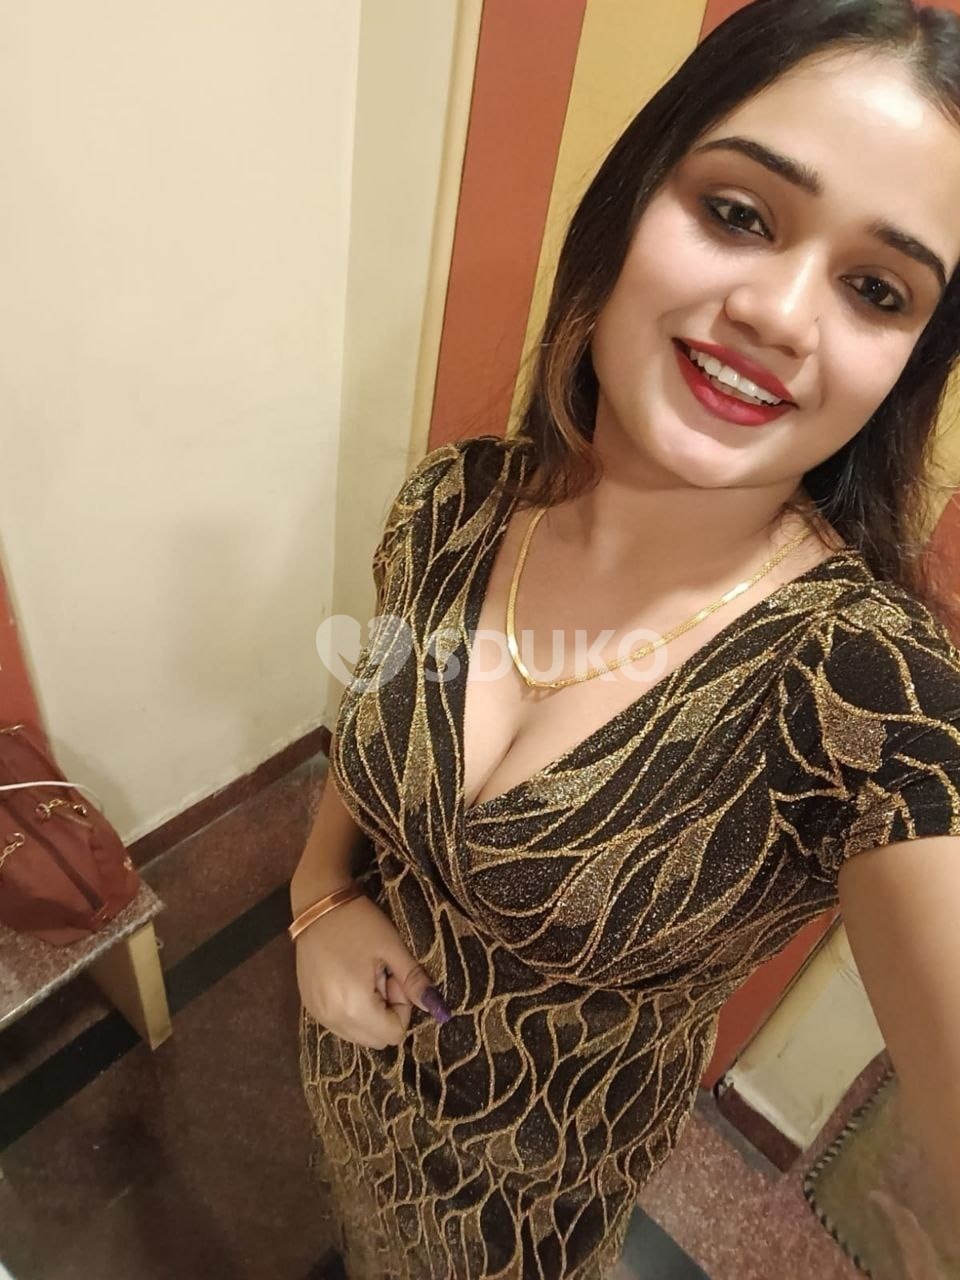 Koramangala..low price 🥰..100% SAFE AND SECURE TODAY LOW PRICE UNLIMITED ENJOY HOT COLLEGE GIRL HOUSEWIFE AUNTIES AVA